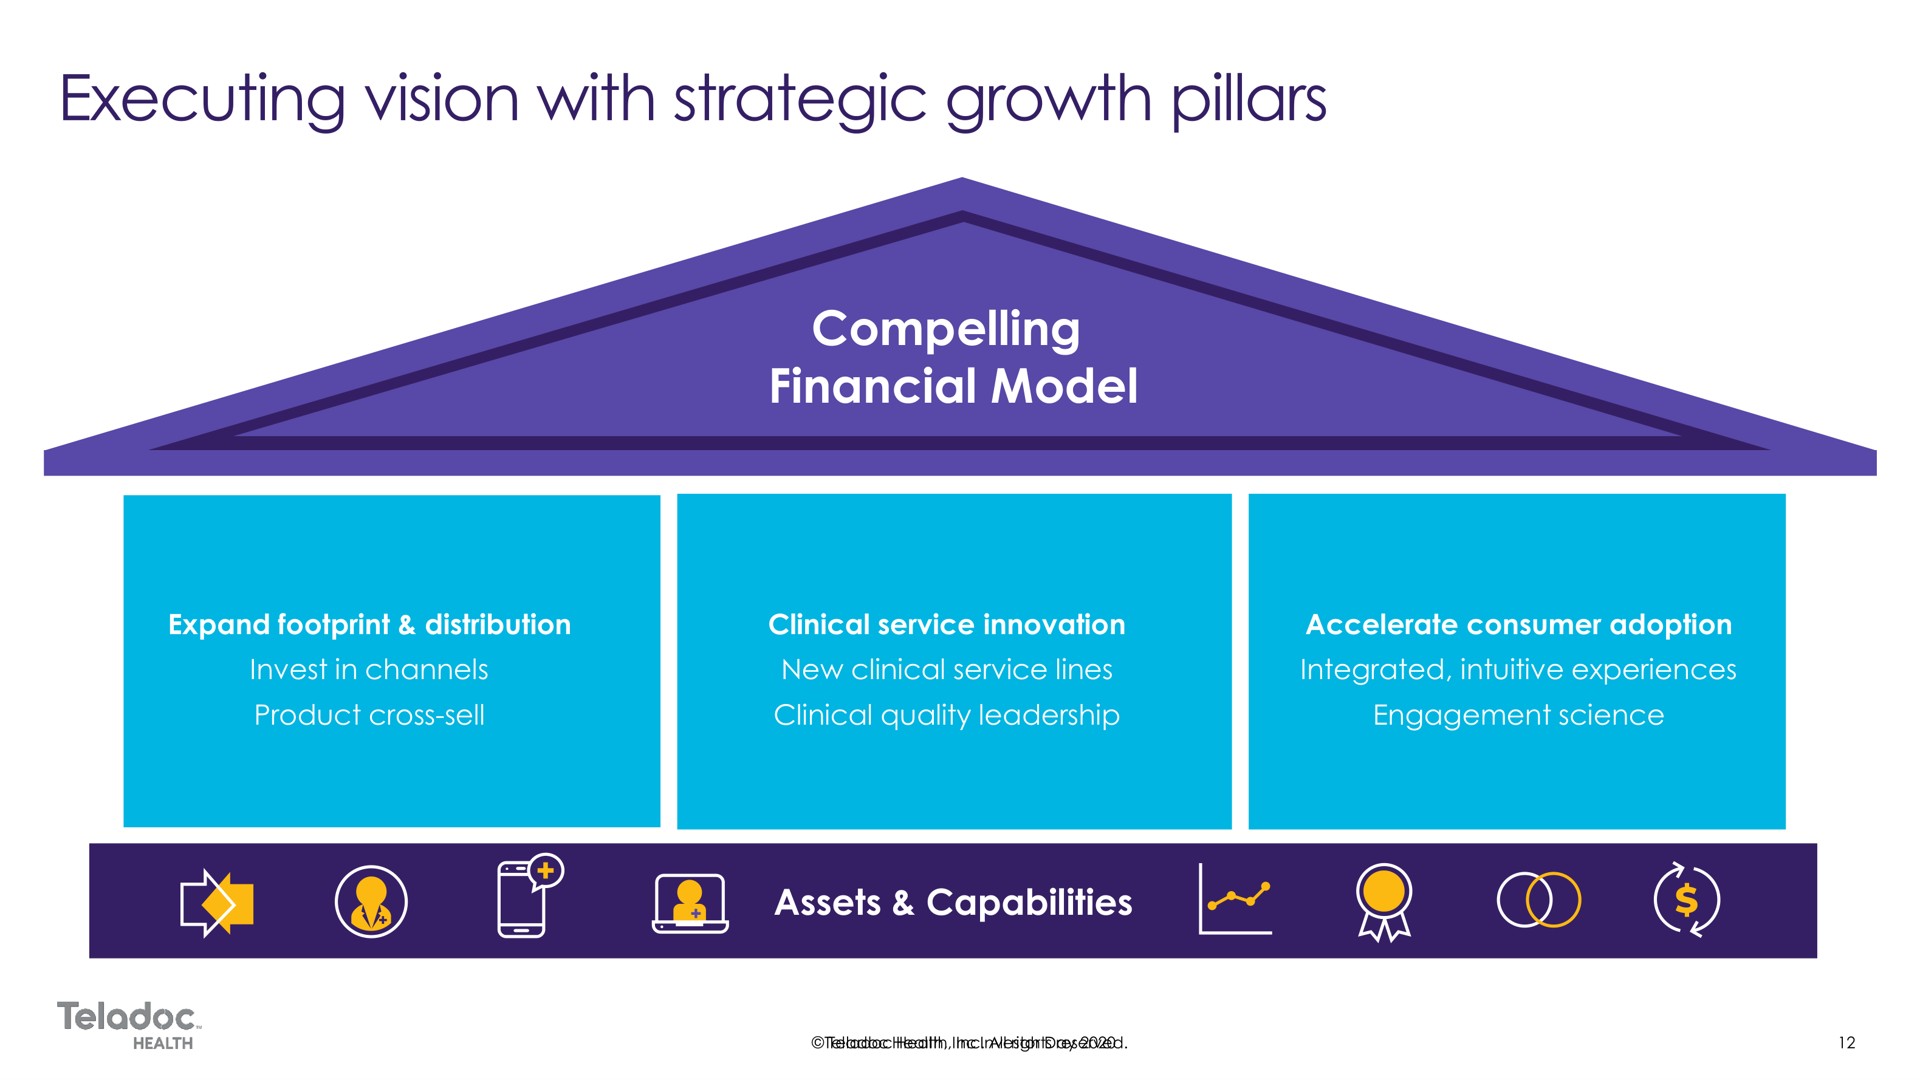 compelling compelling financial model financial model assets capabilities executing vision with strategic growth pillars | Teladoc